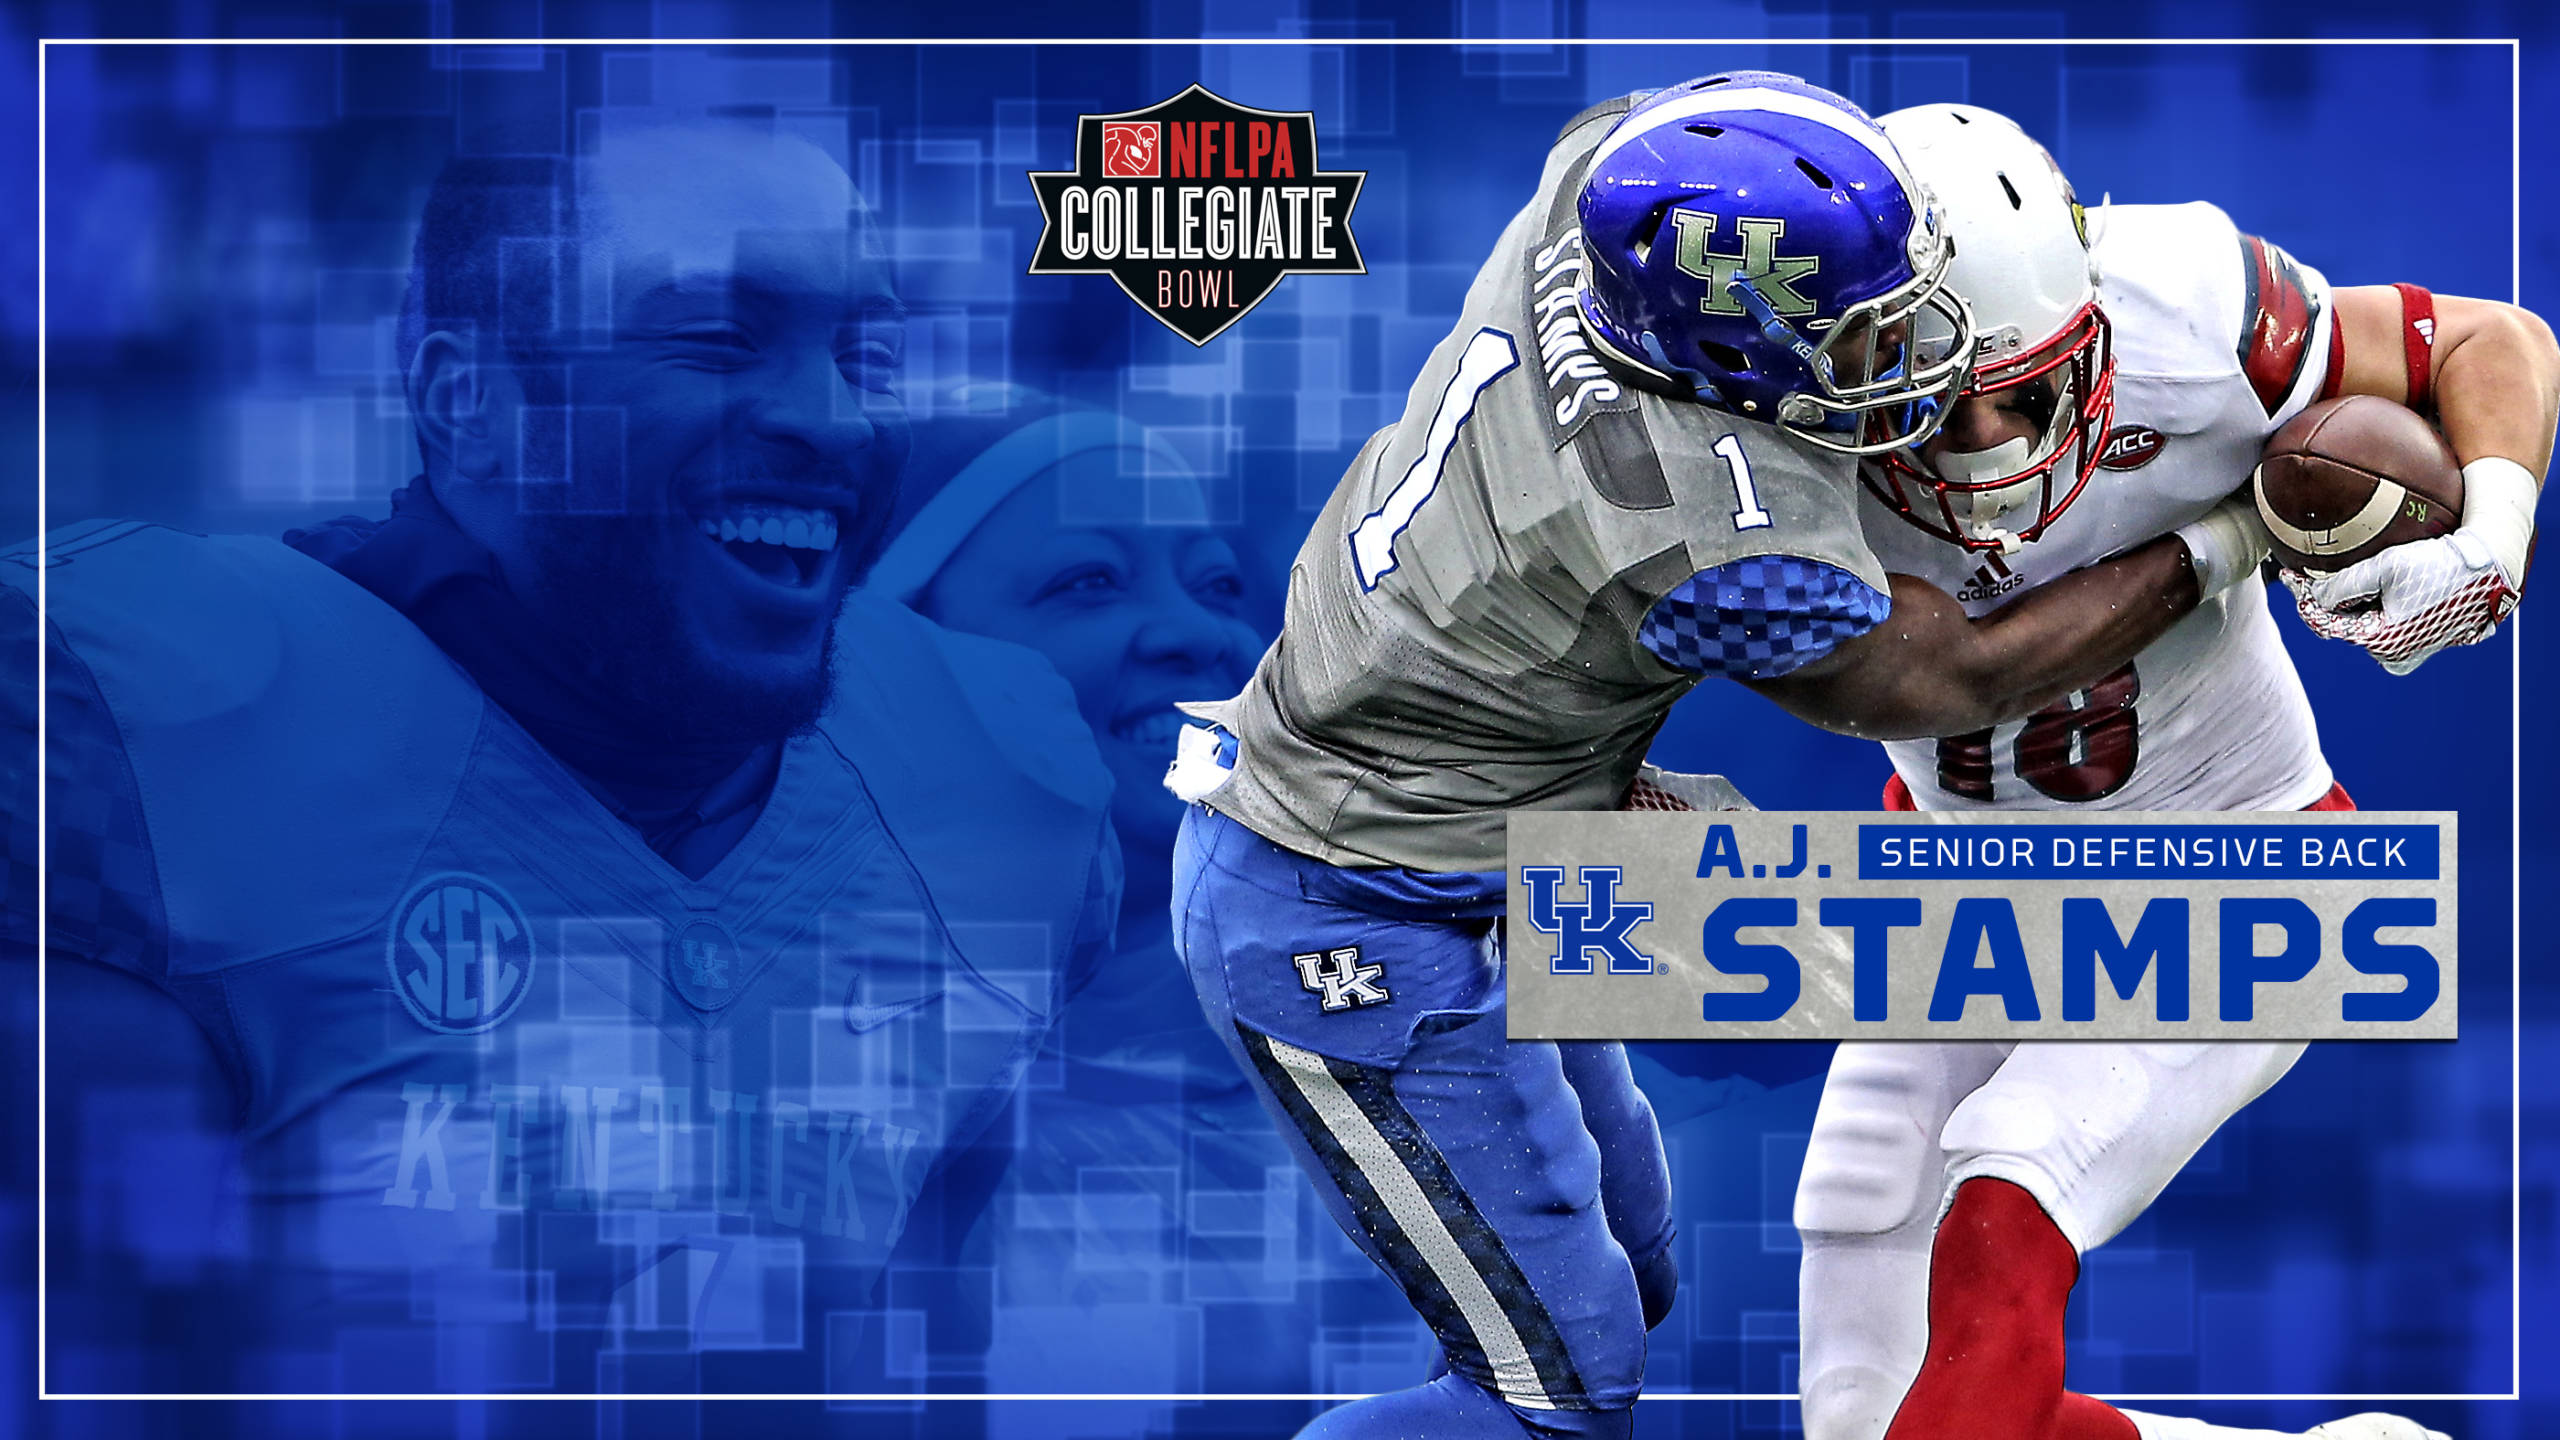 A.J. Stamps to Play in NFLPA Collegiate Bowl